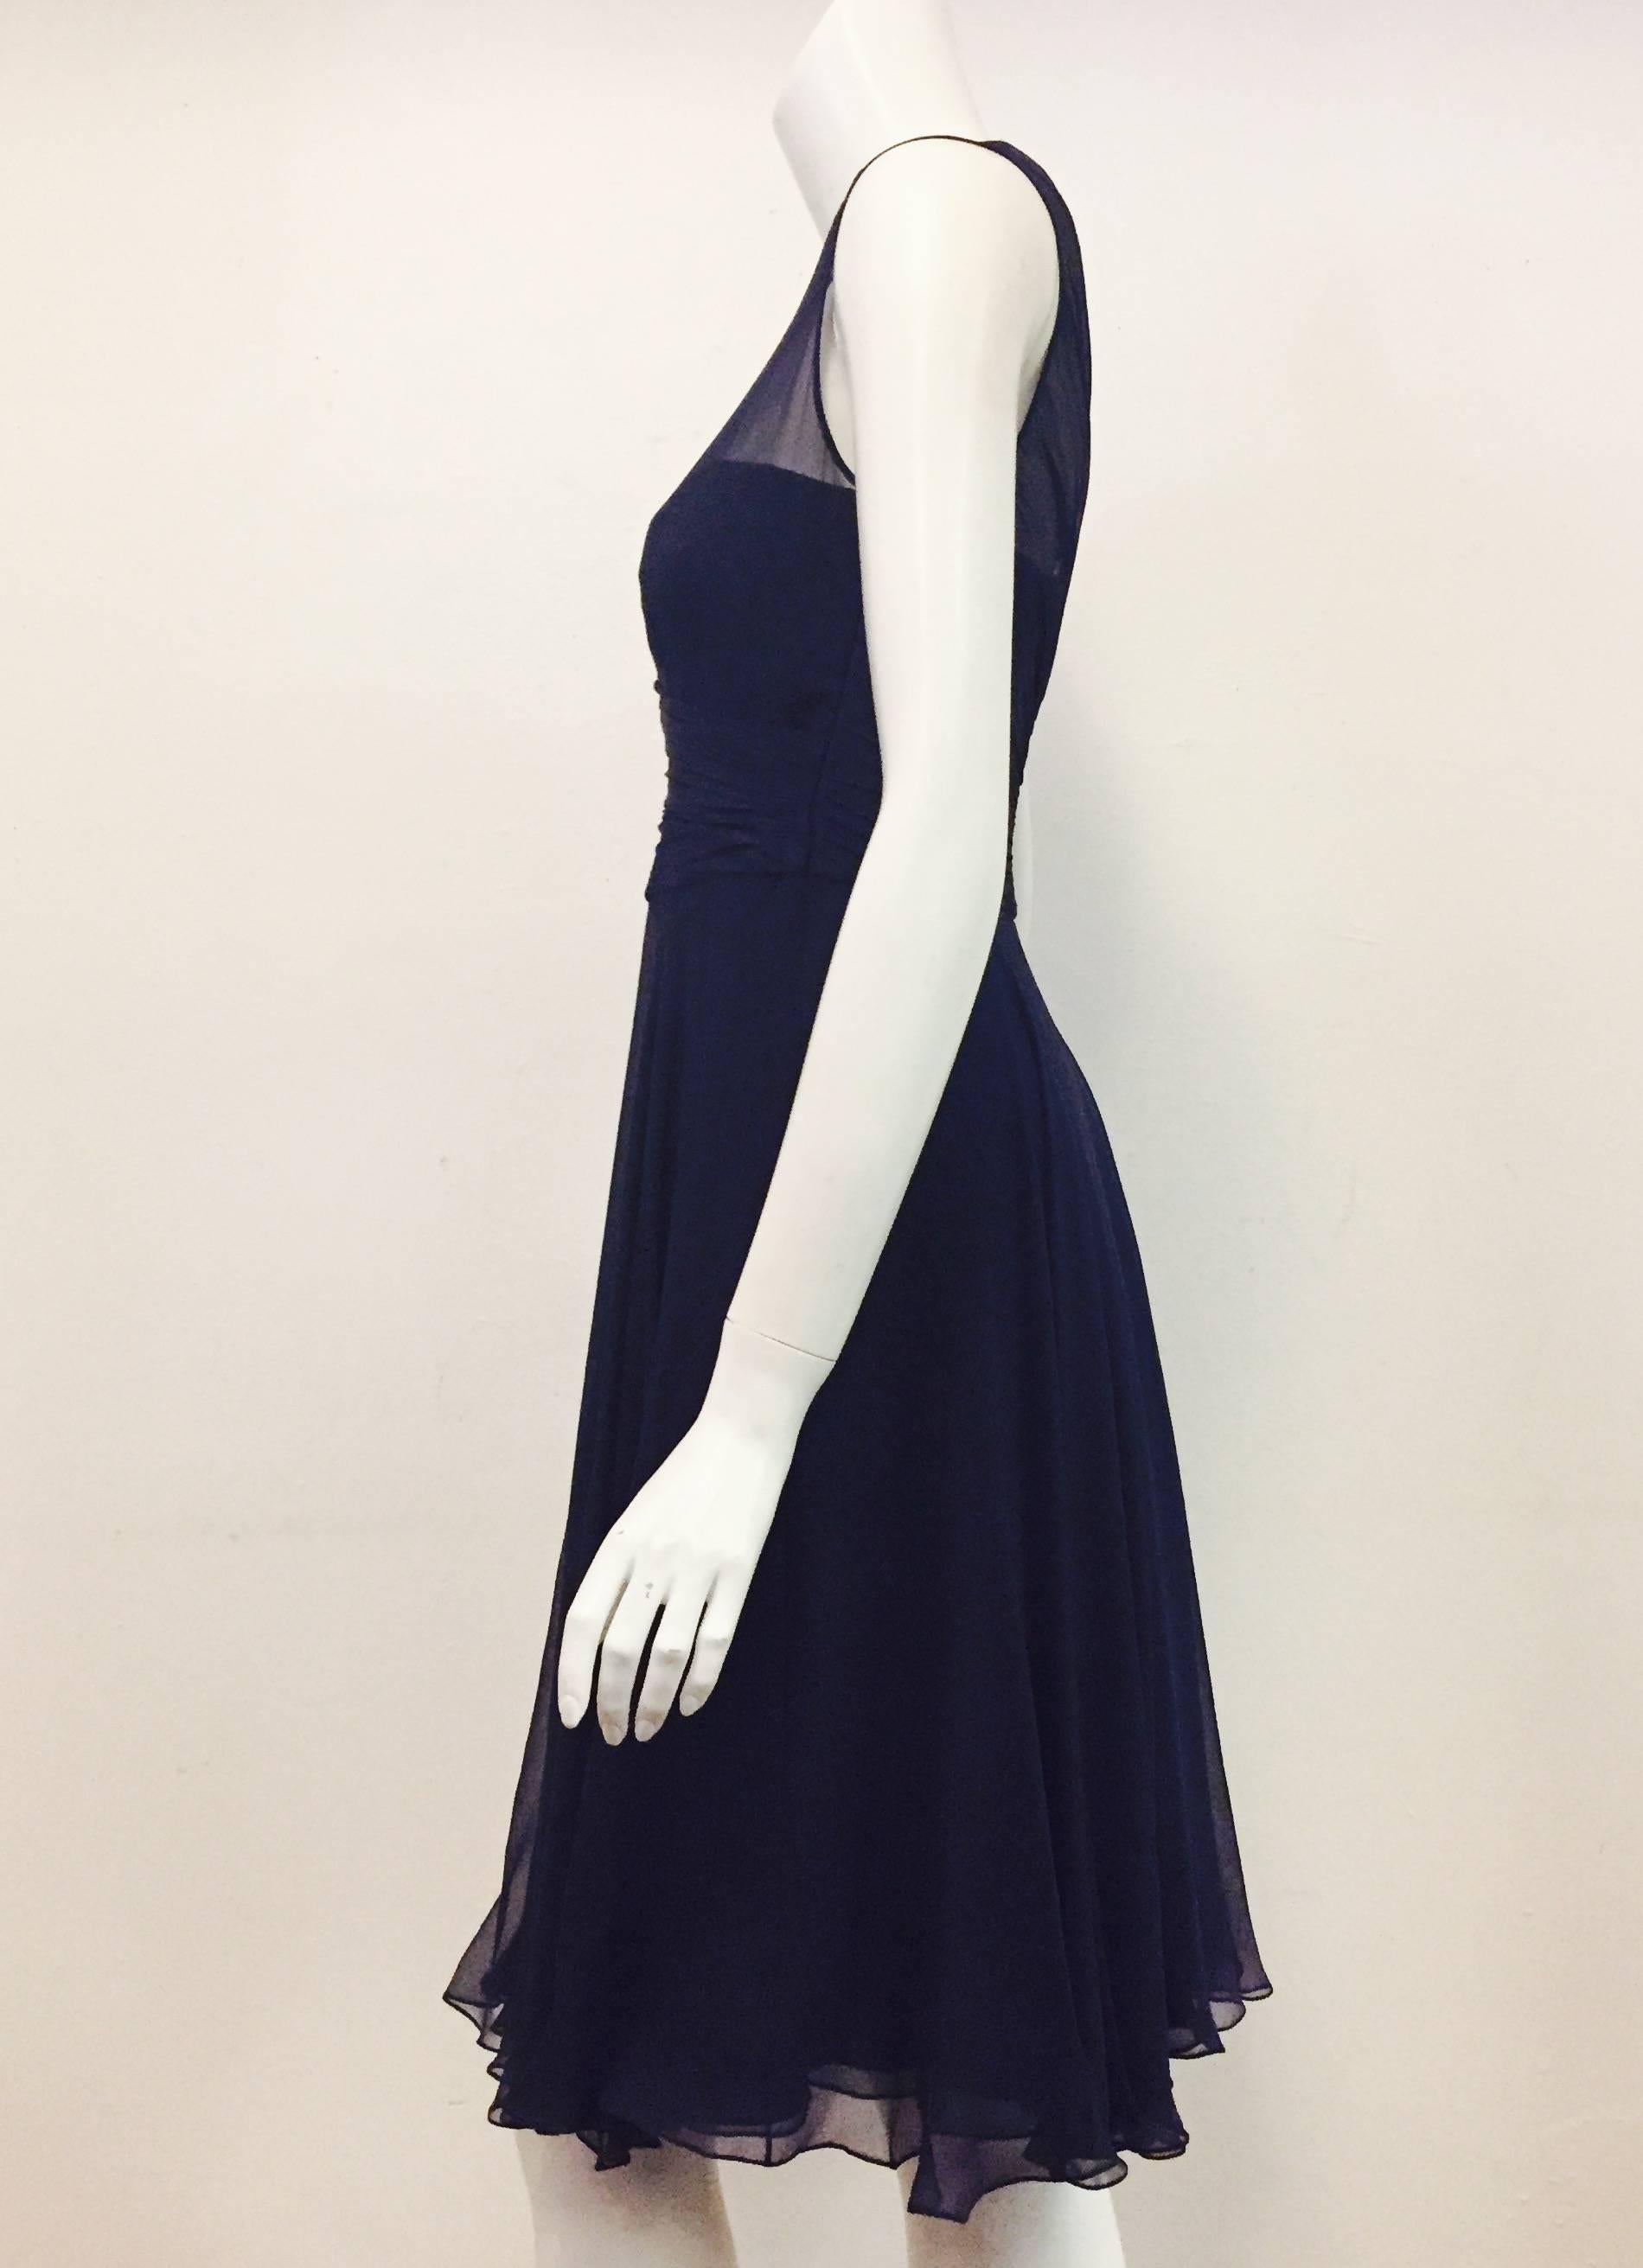 Romantic Ralph Lauren Elegant Navy Silk Evening Dress with Ruffle Skirt In Excellent Condition For Sale In Palm Beach, FL